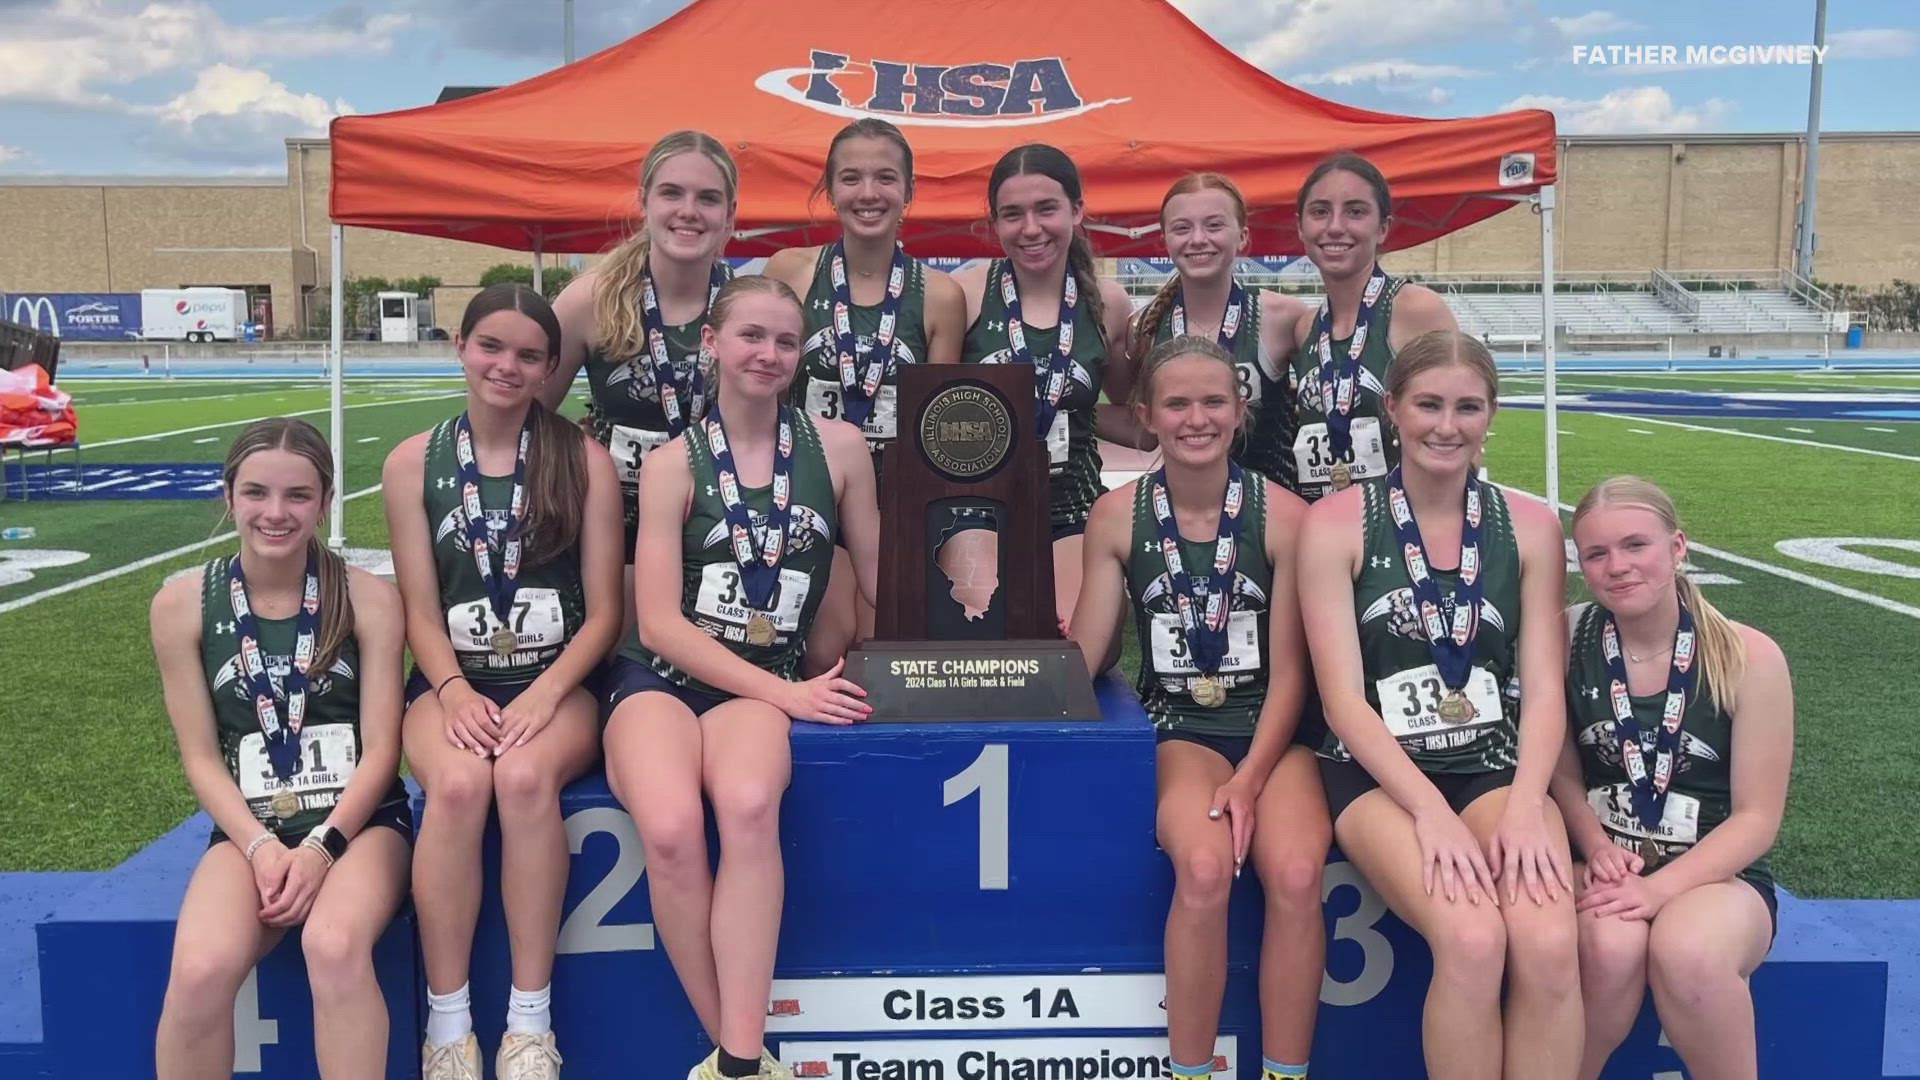 It's a good time to be a Father McGivney Griffin. This past weekend, the girls track team sped their way to the Illinois Class 1A state championship.